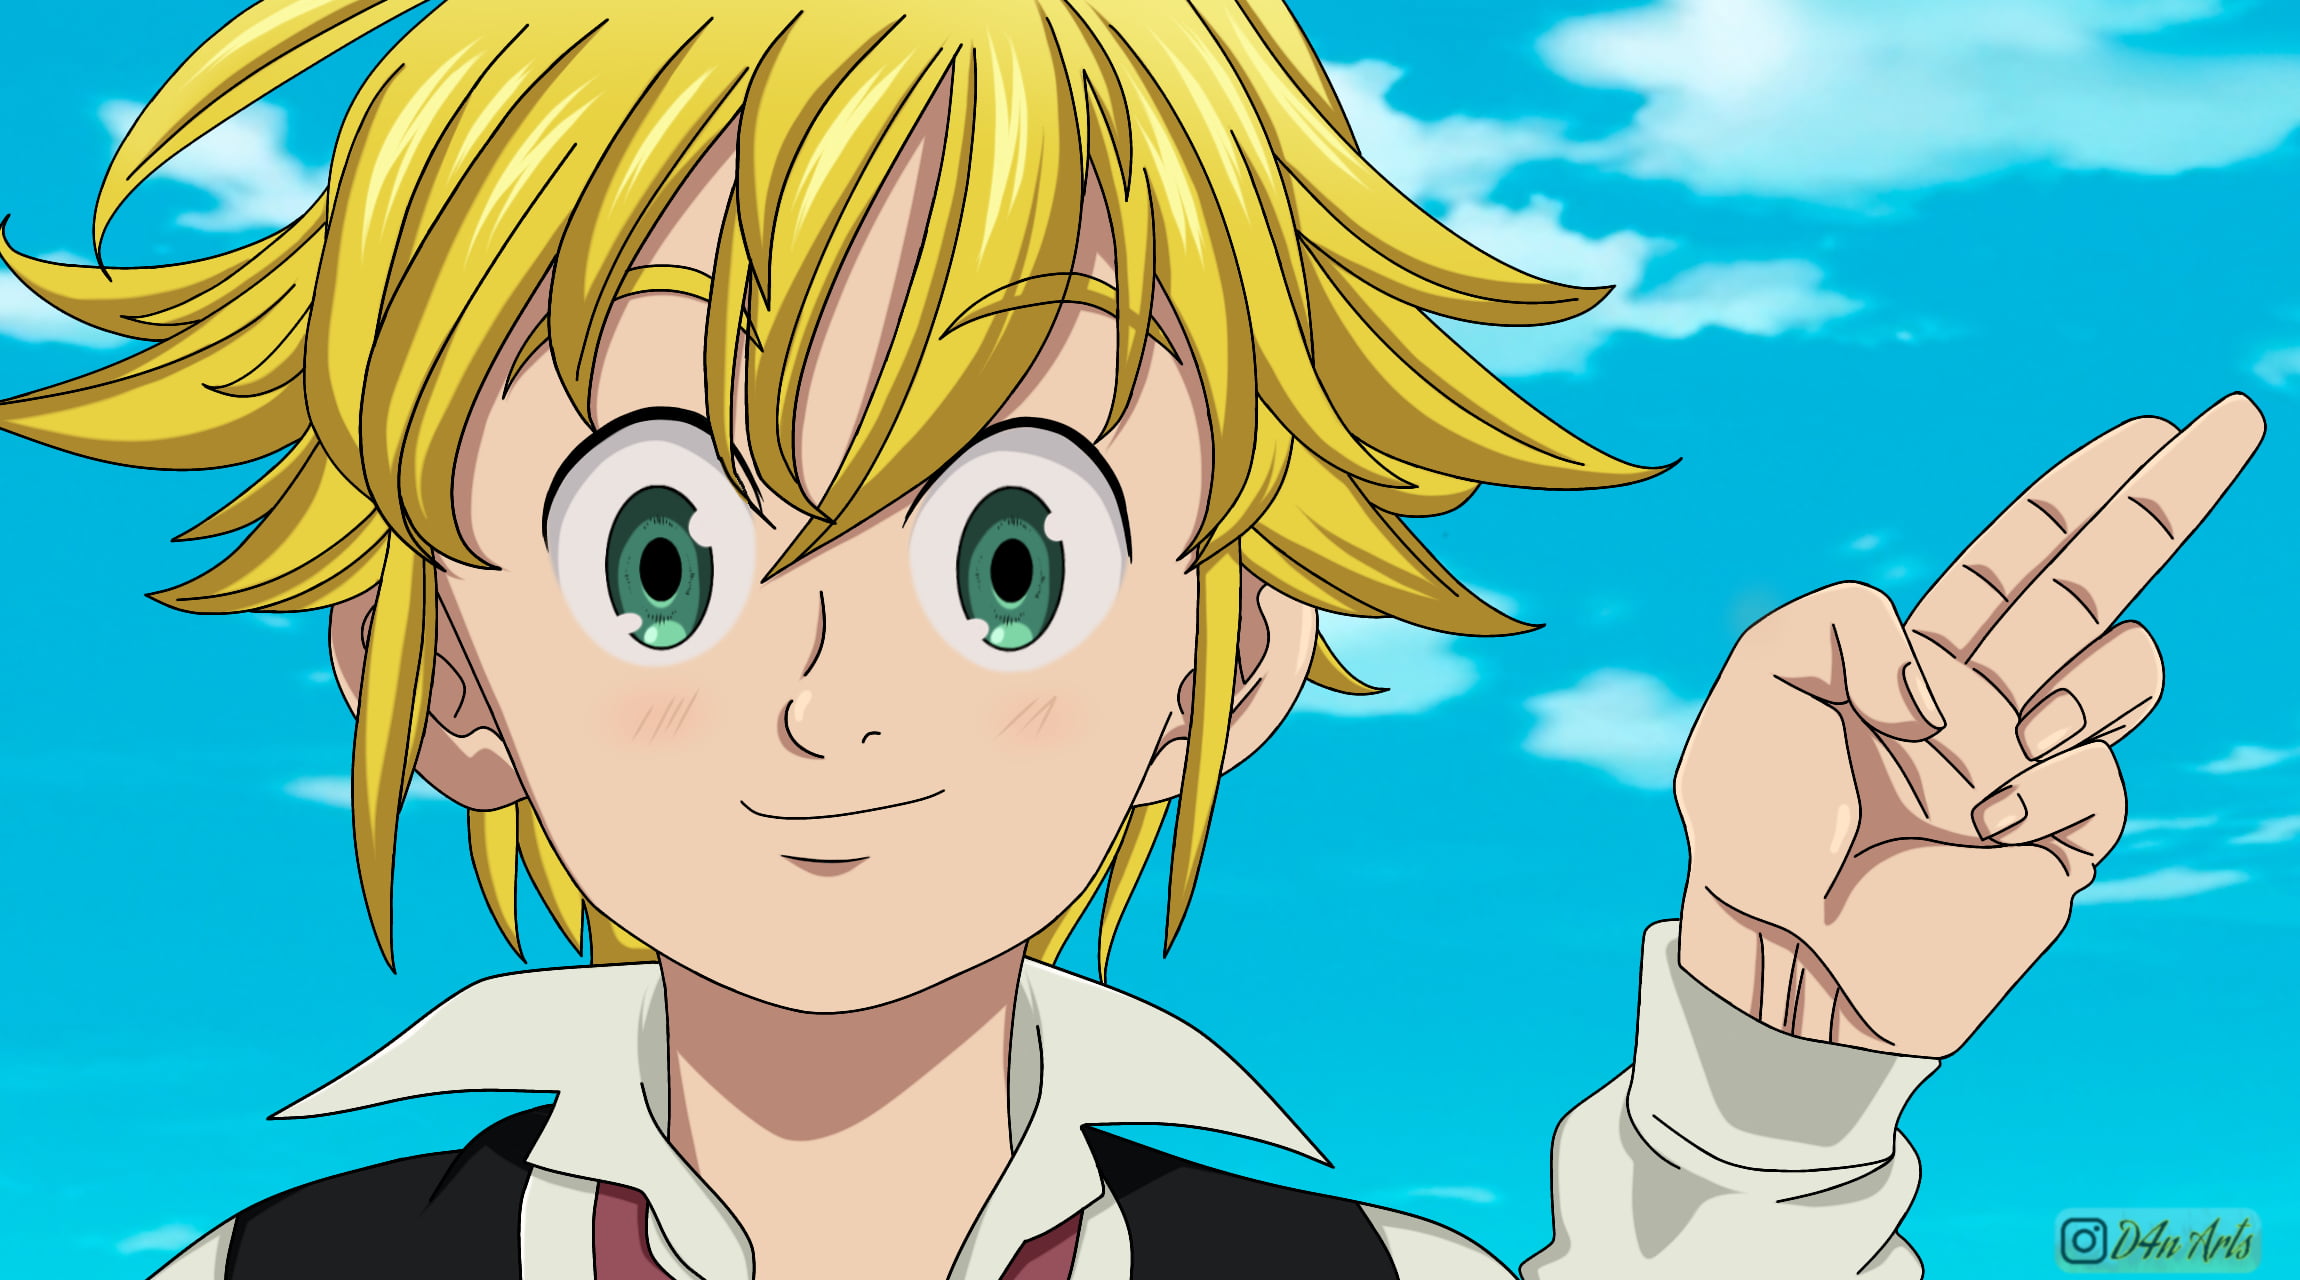 Anime, The Seven Deadly Sins, Blonde, Green Eyes, Meliodas (The Seven Deadly Sins)